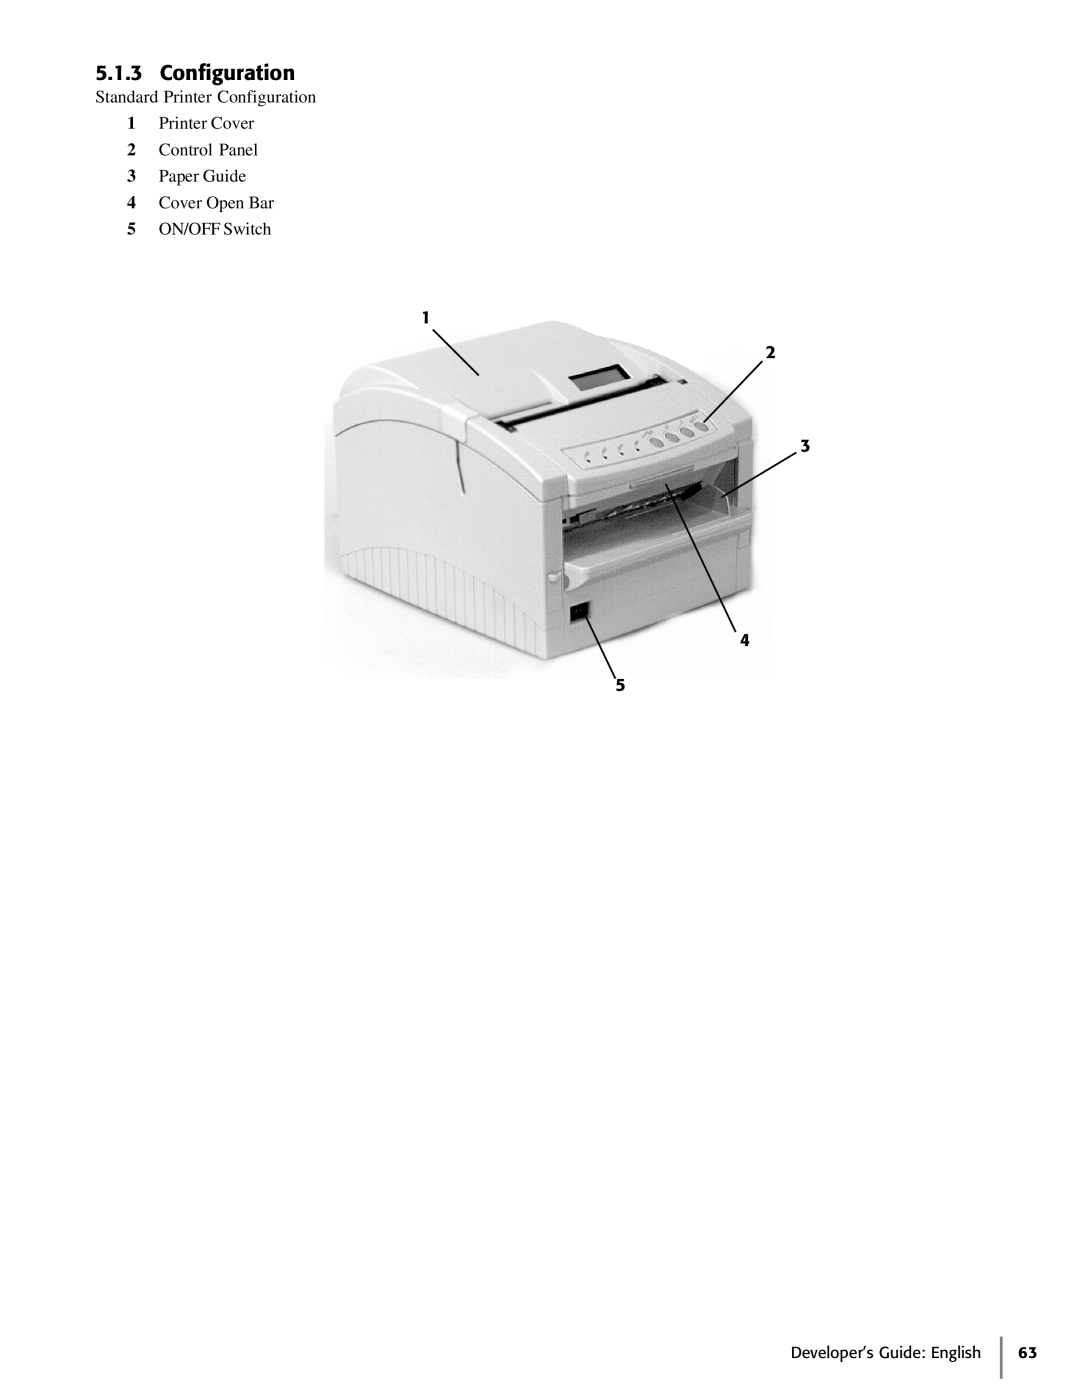 Oki 425D Standard Printer Configuration 1 Printer Cover 2 Control Panel, Paper Guide 4 Cover Open Bar 5 ON/OFF Switch 